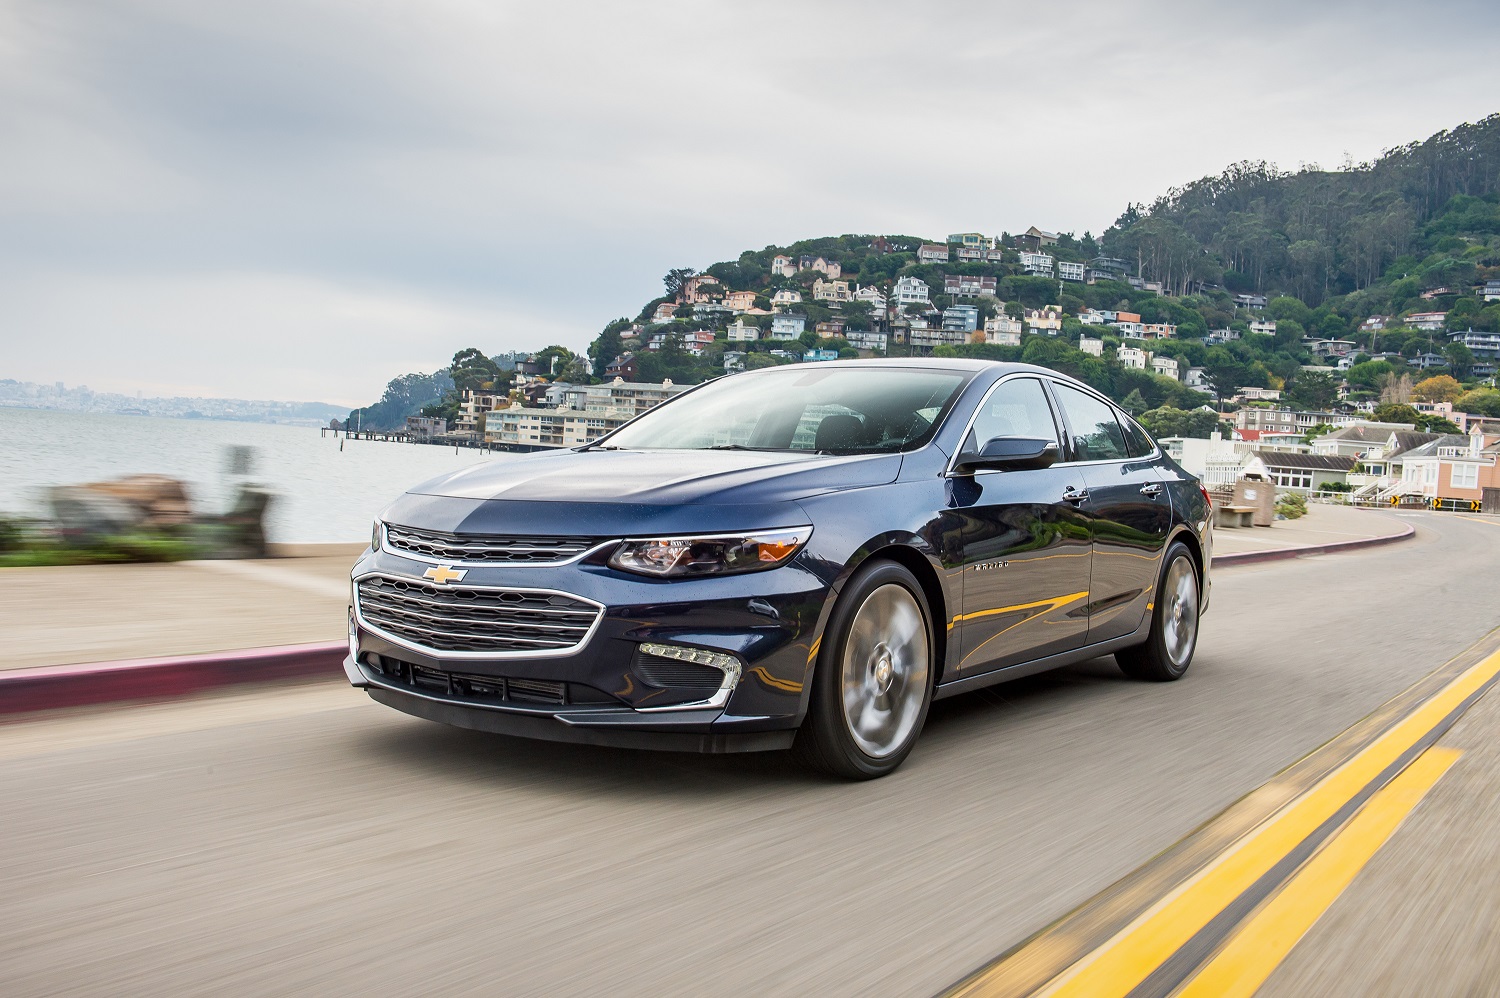 The Chevrolet Malibu is an enduring classic that helped launch the midsize sedan segment more than 50 years ago. It drives into the future with an all-new 2016 model engineered to offer more efficiency, connectivity and advanced safety features than ever – all with a brand-new, progressive design.